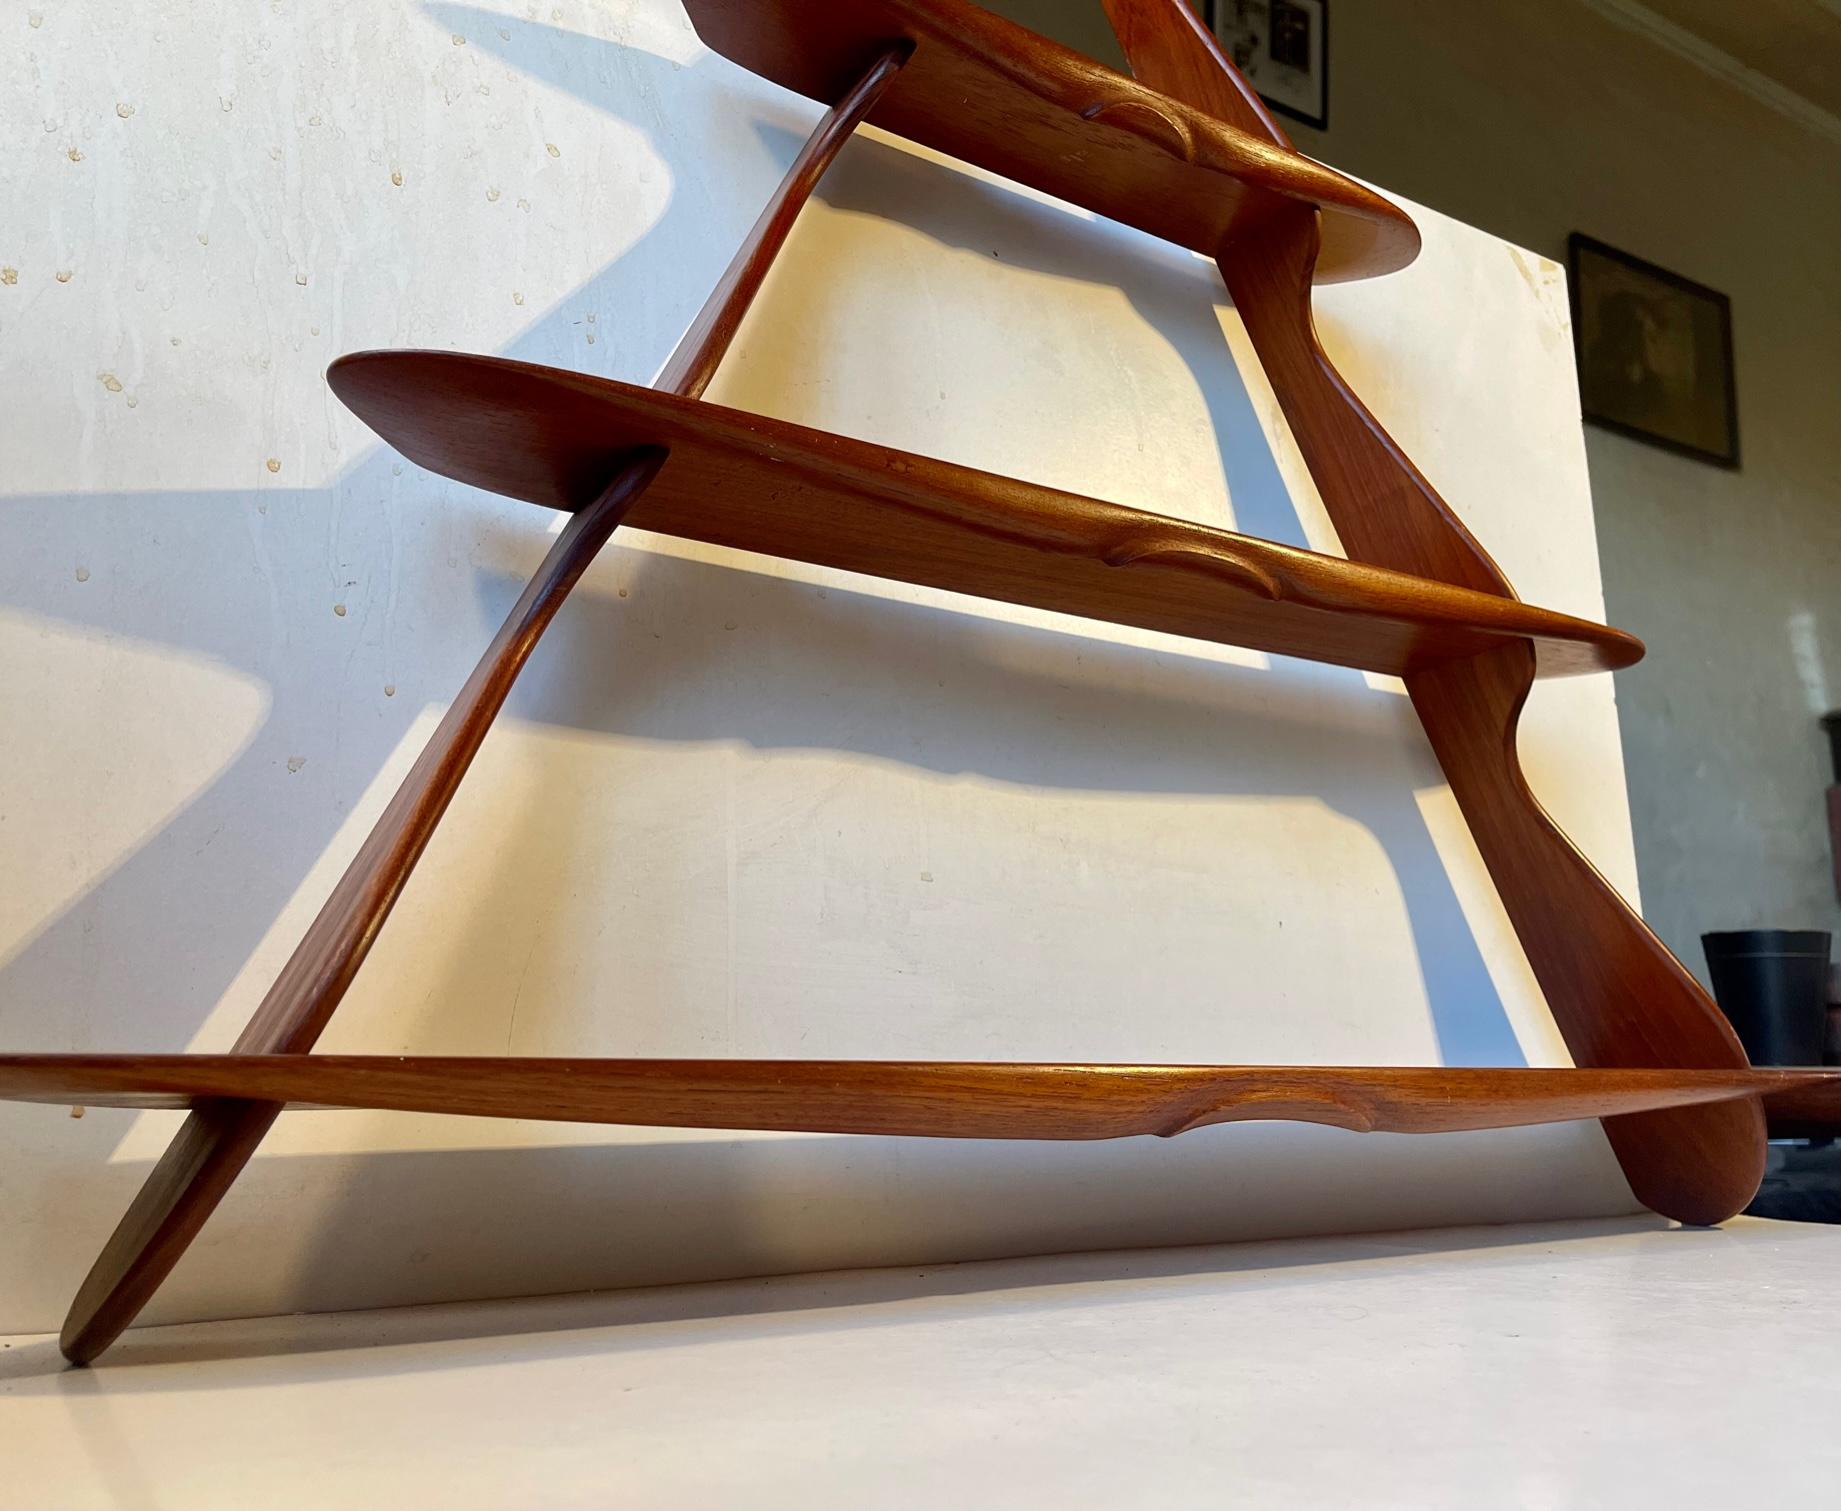 Small triangular wall shelf in solid teak. Assembled without the use of metal. Beautiful organically shaped profiles. This design is attributed to the most eccentric and detail oriented Danish Design master Peder Moos. Whether or not he had his